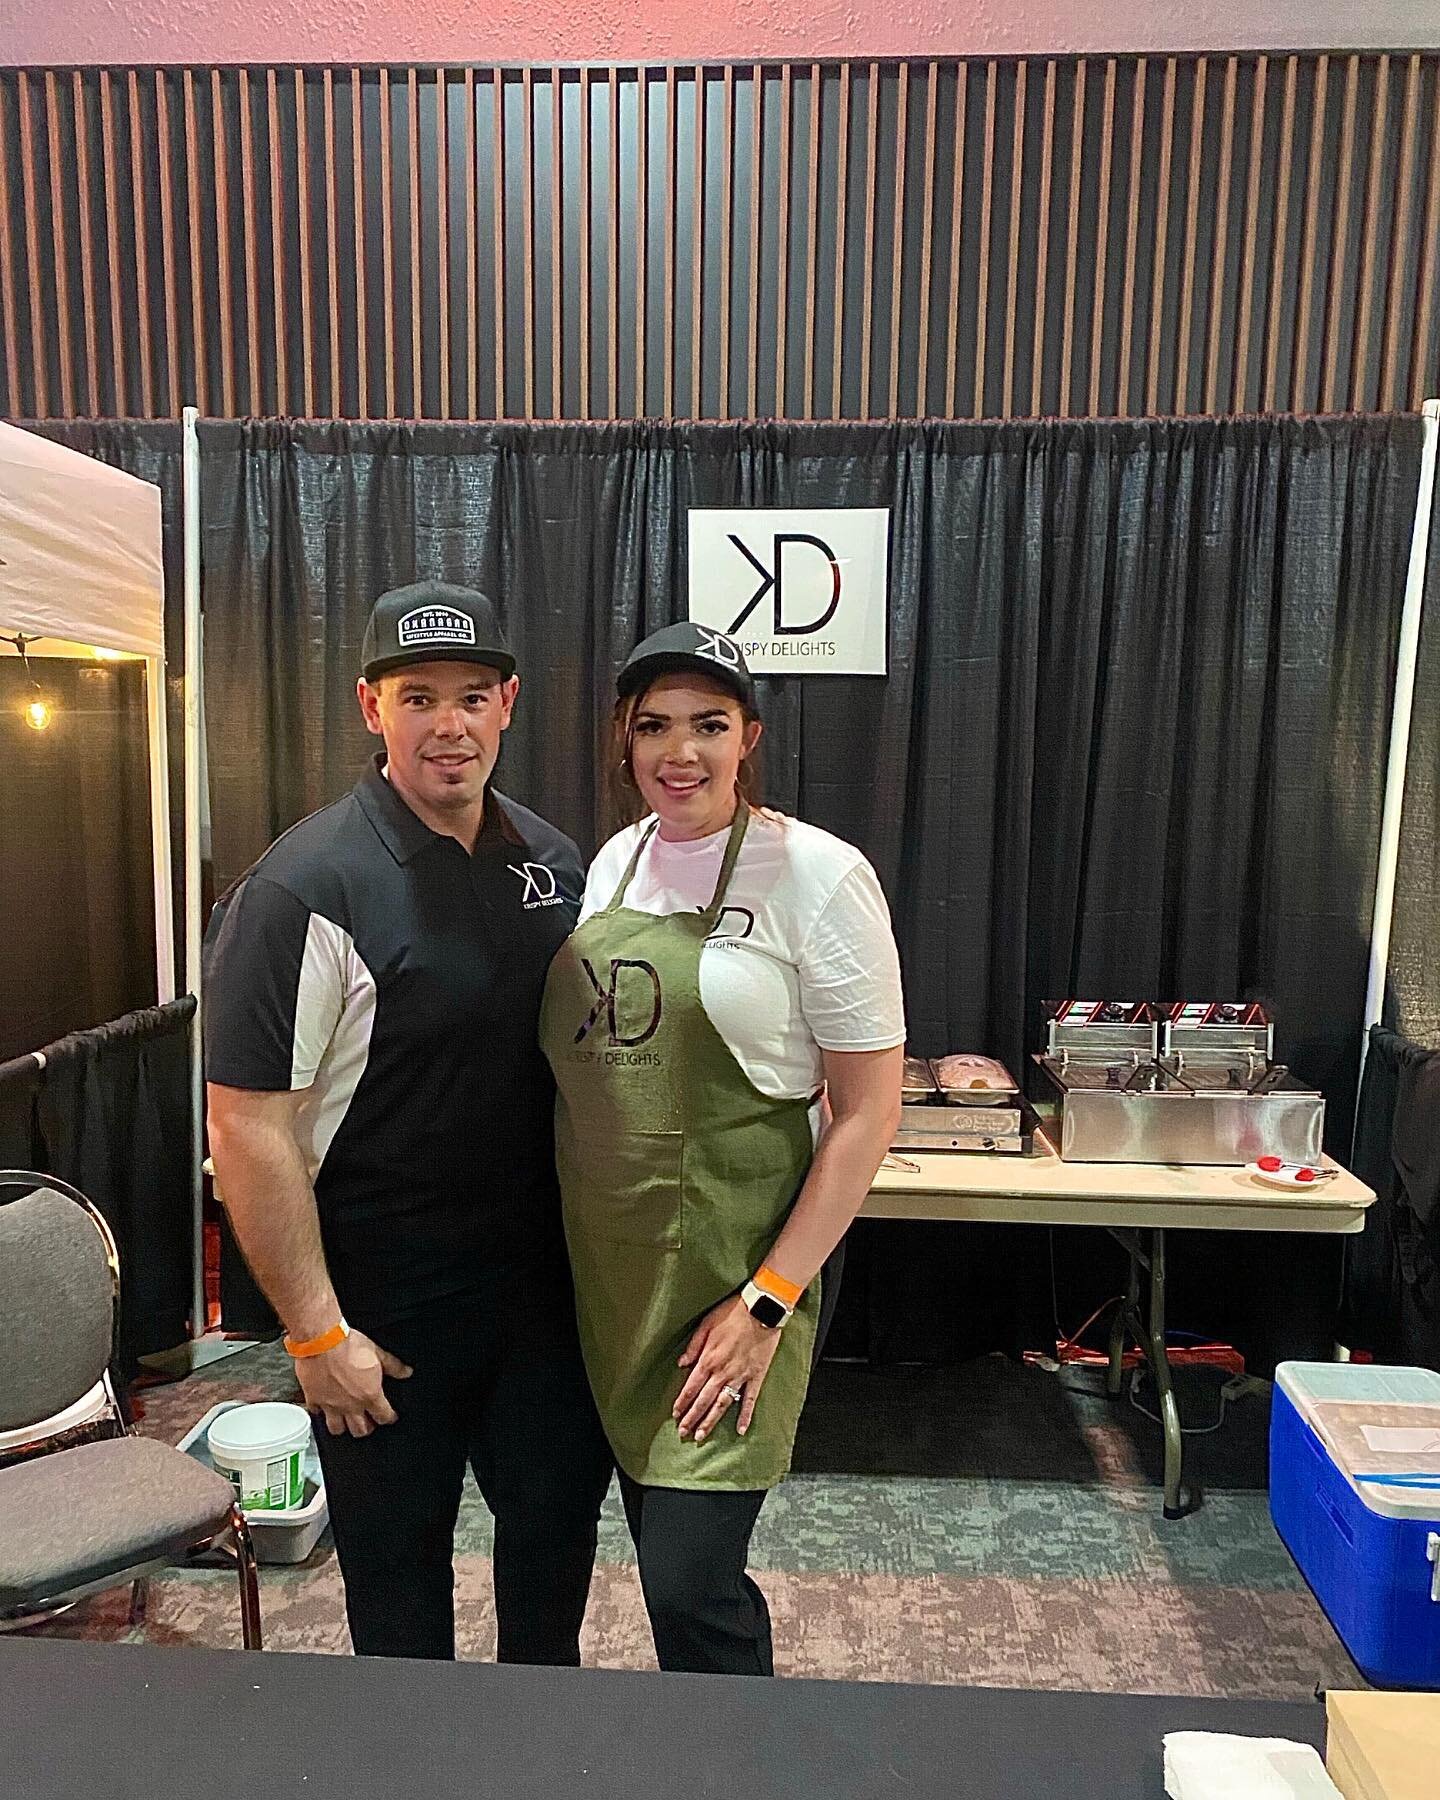 Wow what a day! Thank to everyone who supported us at the @harvestcollectivemarket and @flavorfestivalyll we had such a busy but great day doing both of these events! Now time for bed 😴

#krispydelights #delightineverybite #springroll #potato #krisp